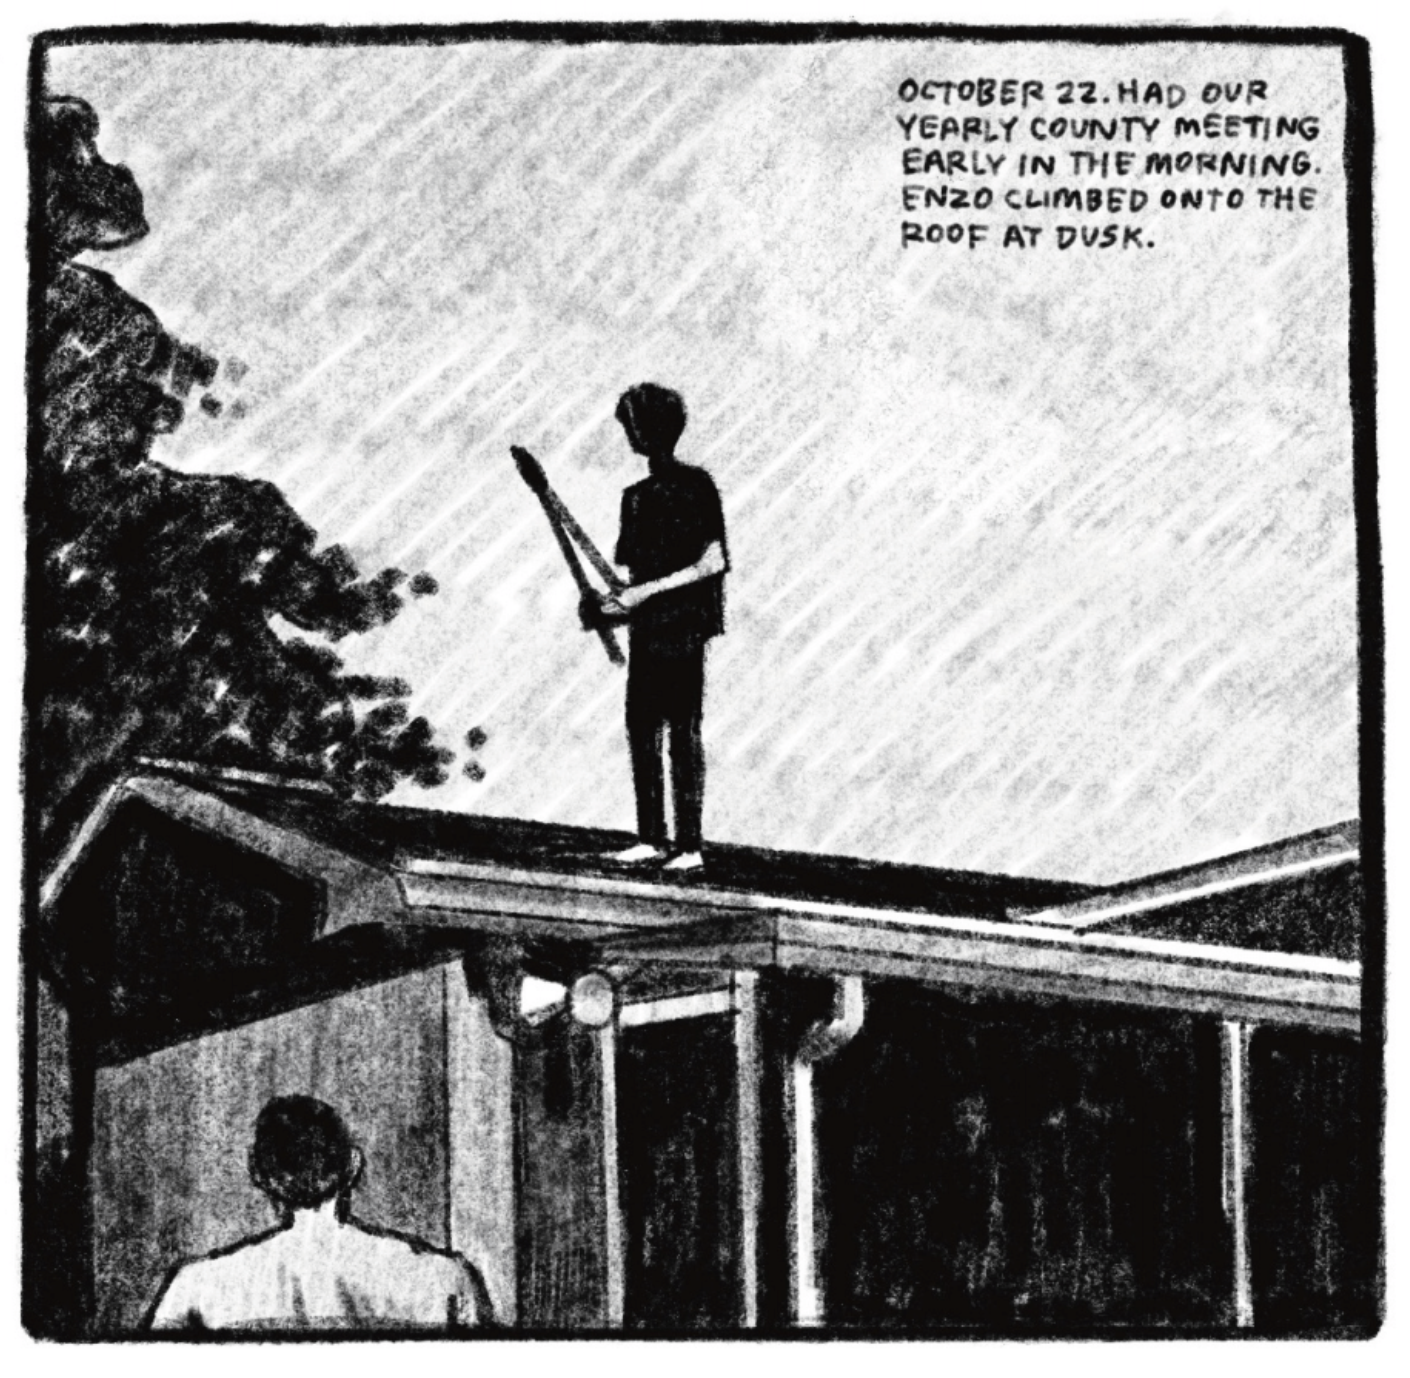 Enzo is standing on the roof of the house. He is silhouetted, holding large garden shears. Tony is on the ground in front of the house looking at something in front of him. â€œOctober 22. Had our yearly county meeting early in the morning. Enzo climbed onto the roof at dusk.â€